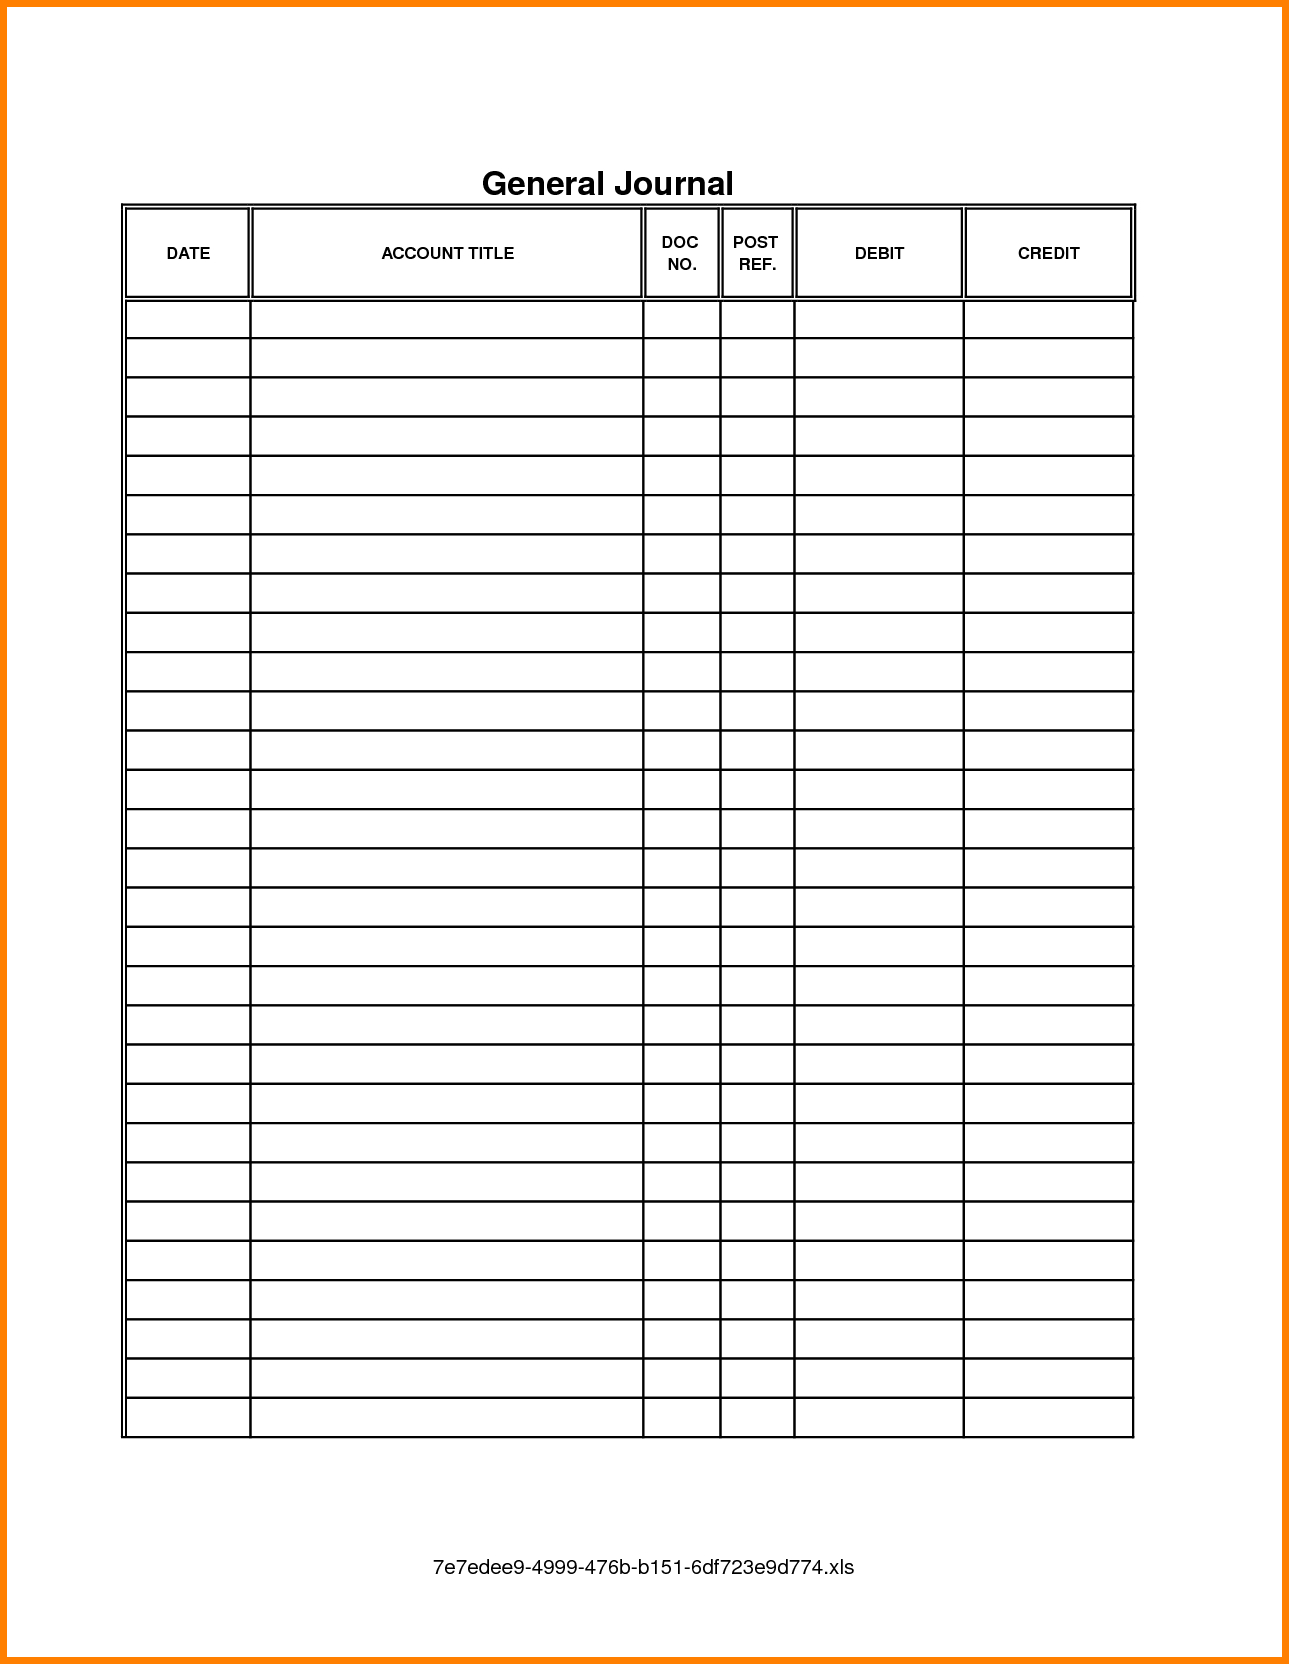 012 Template Ideas General Journal Ledger Accounting Within Blank Ledger Template